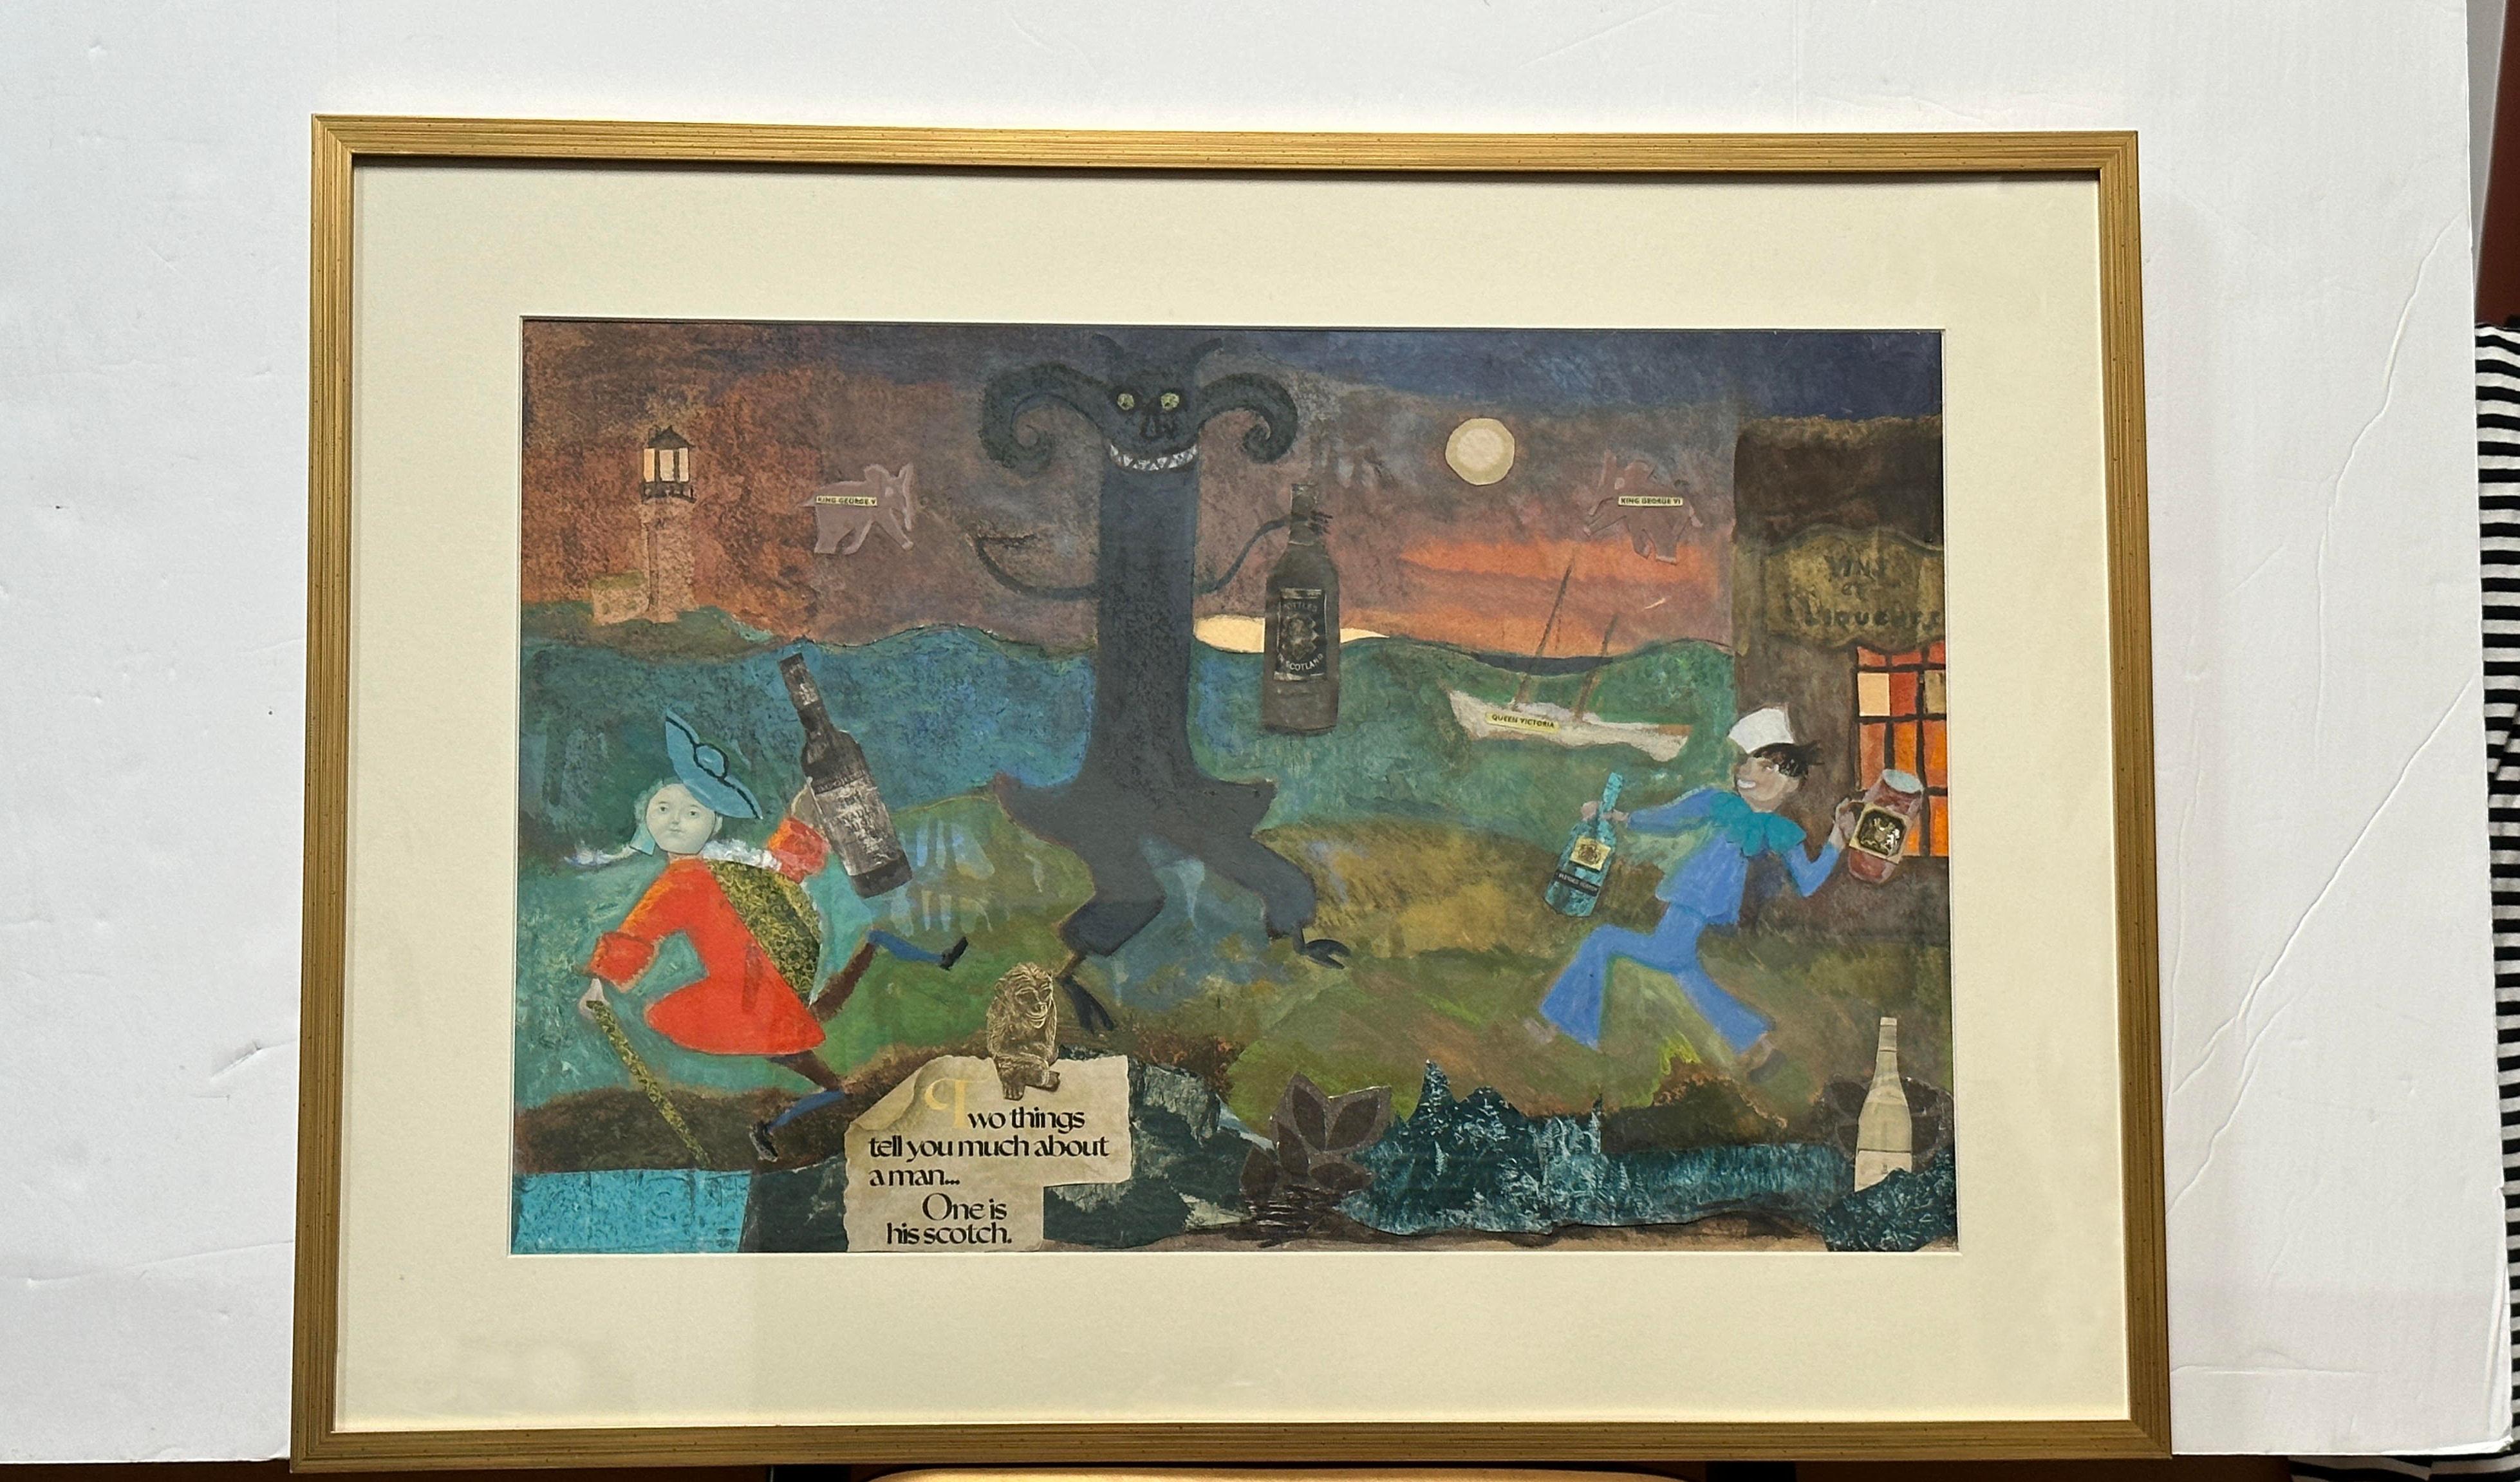 If we cannot say much about the painter, we can say many things about this piece of Great Britain's colonial history!
Gregory's enigmatic mixed media artwork, 